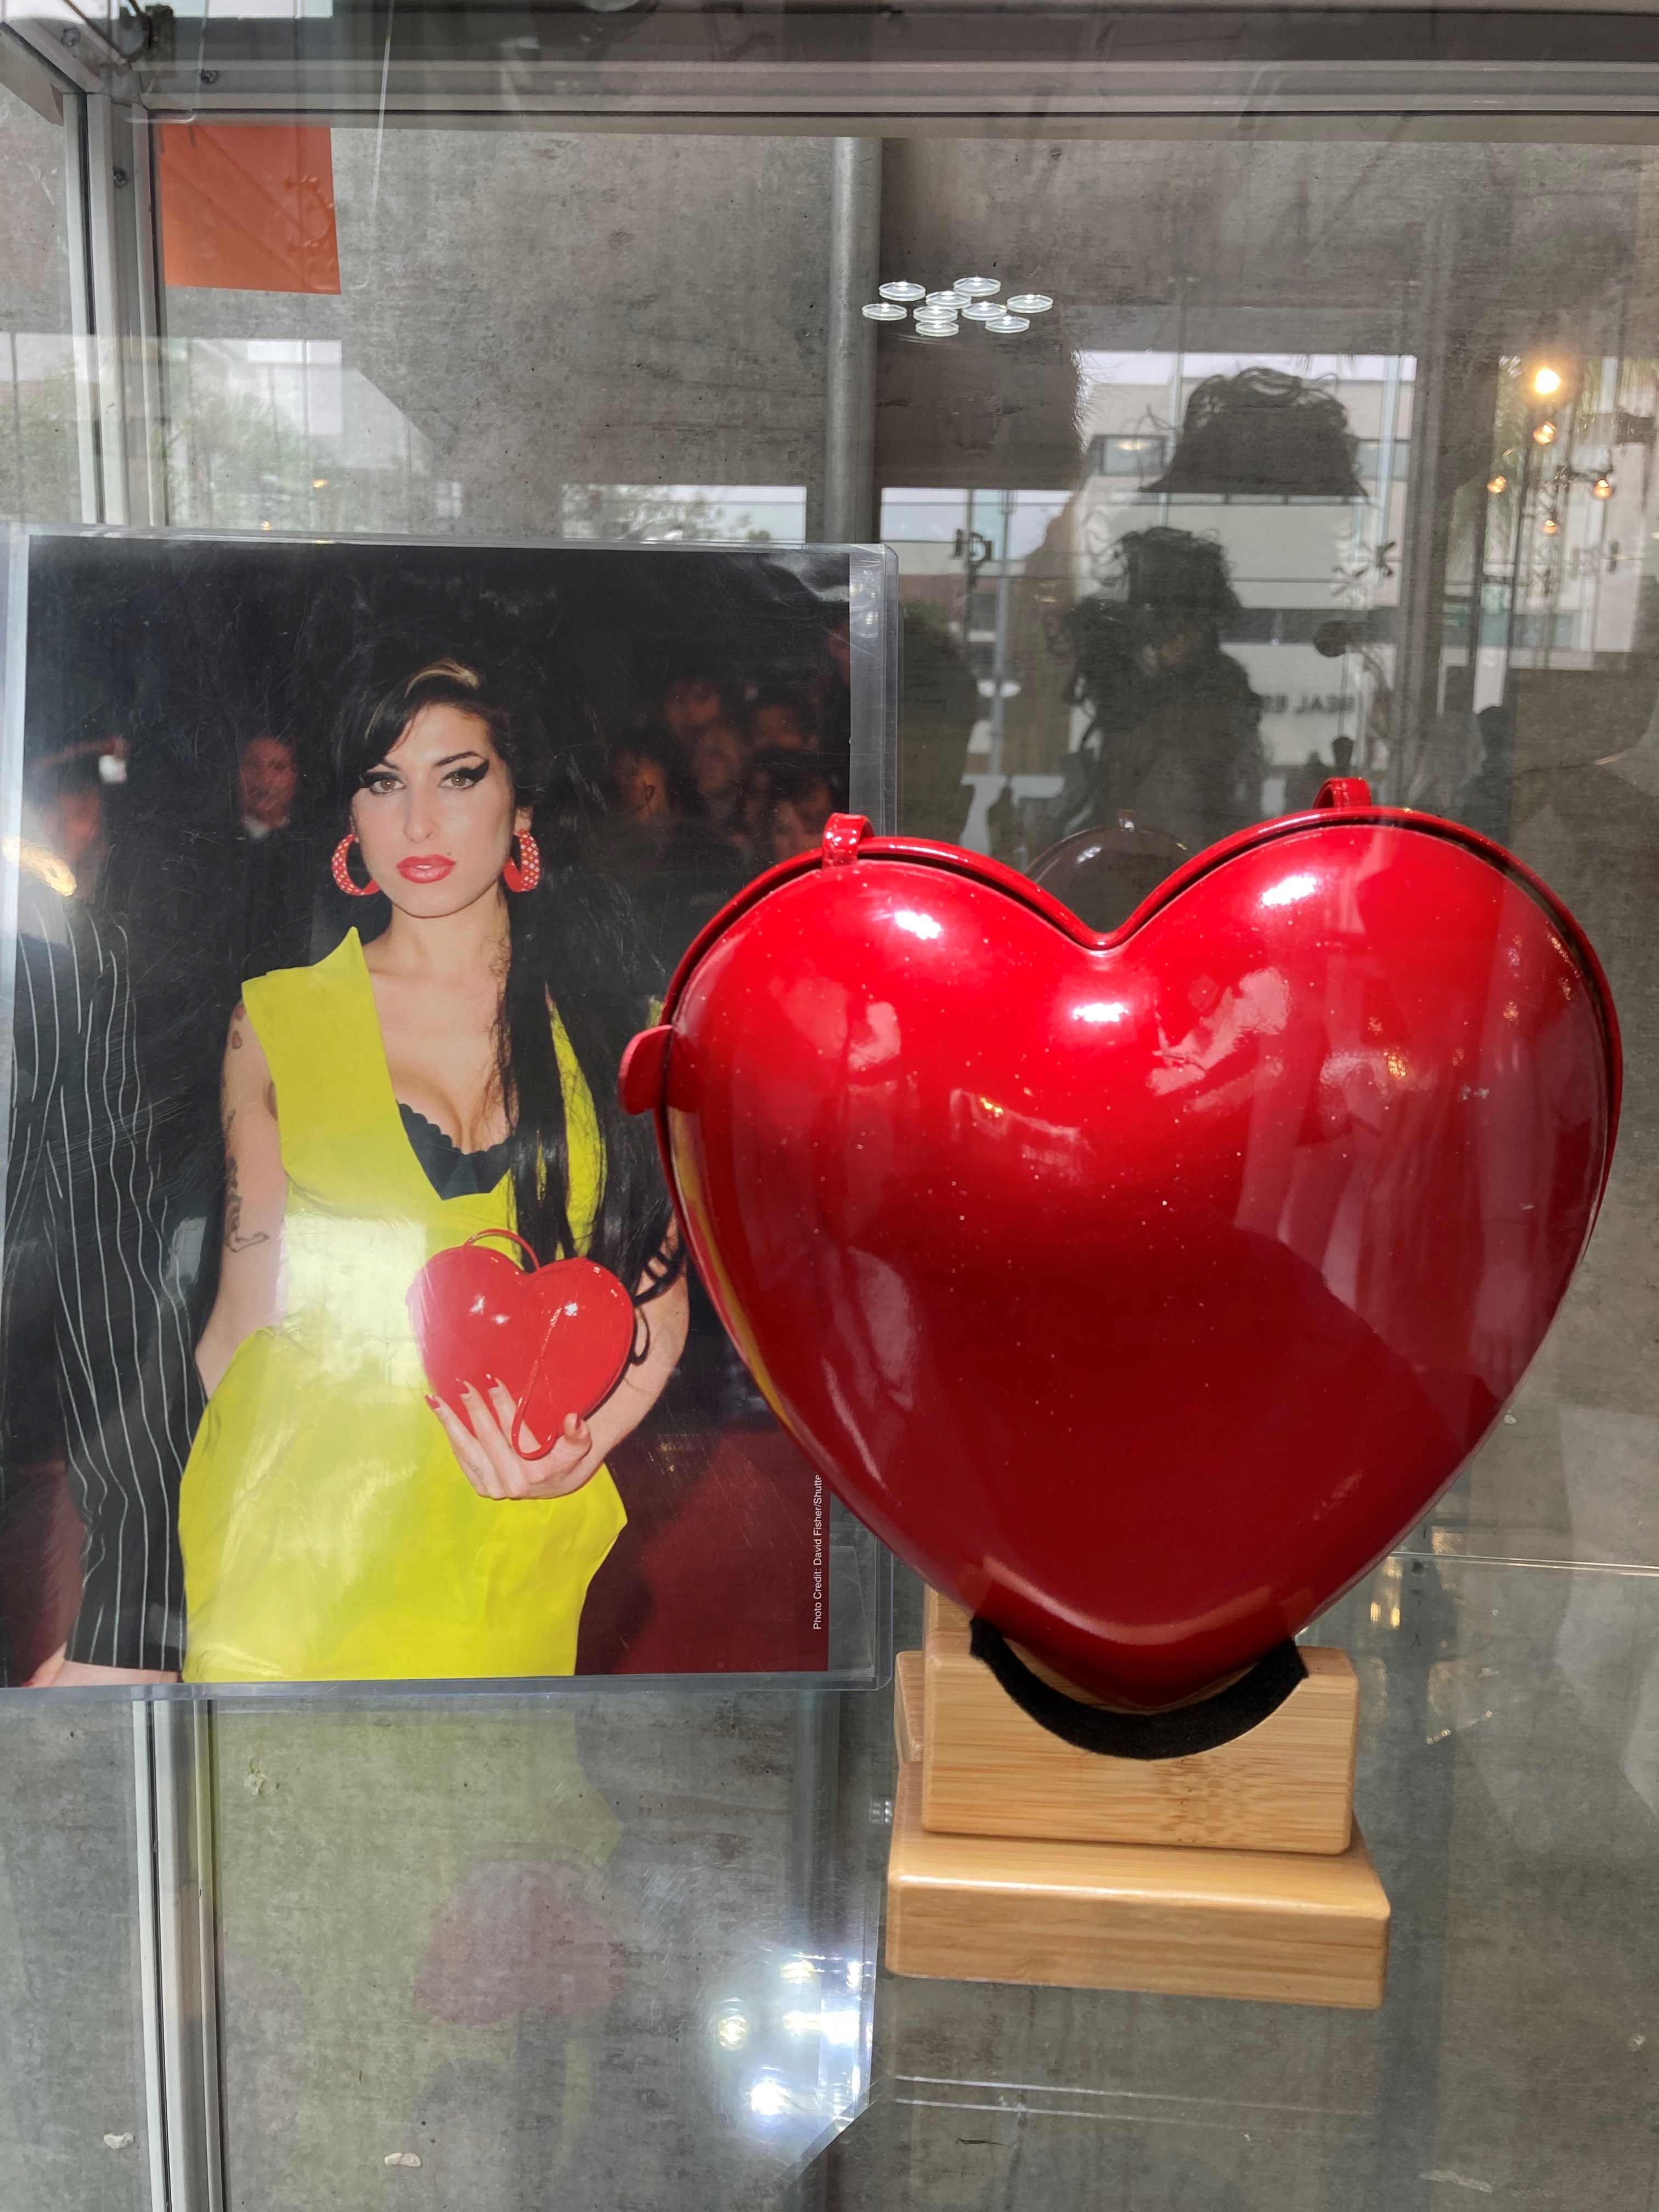 Amy Winehouse auction